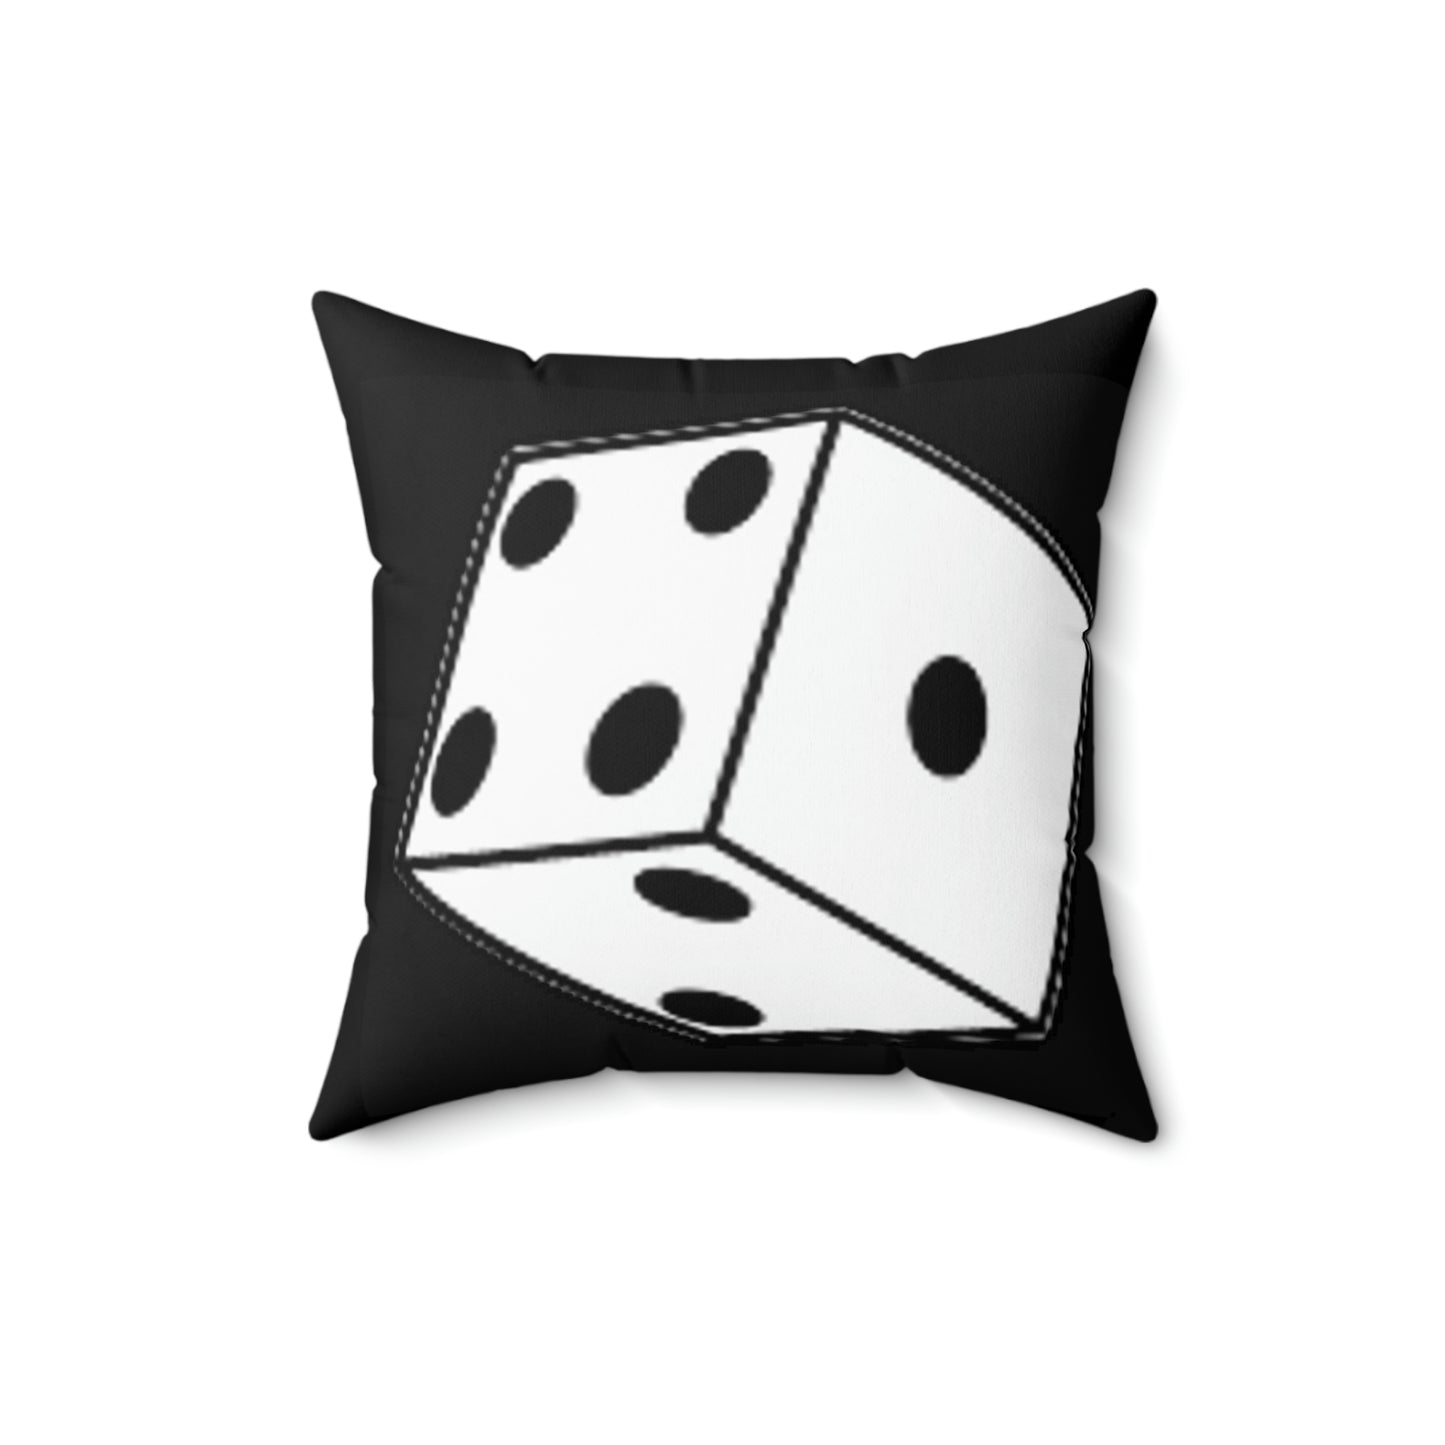 Dice Roll Spun Polyester Square Pillow